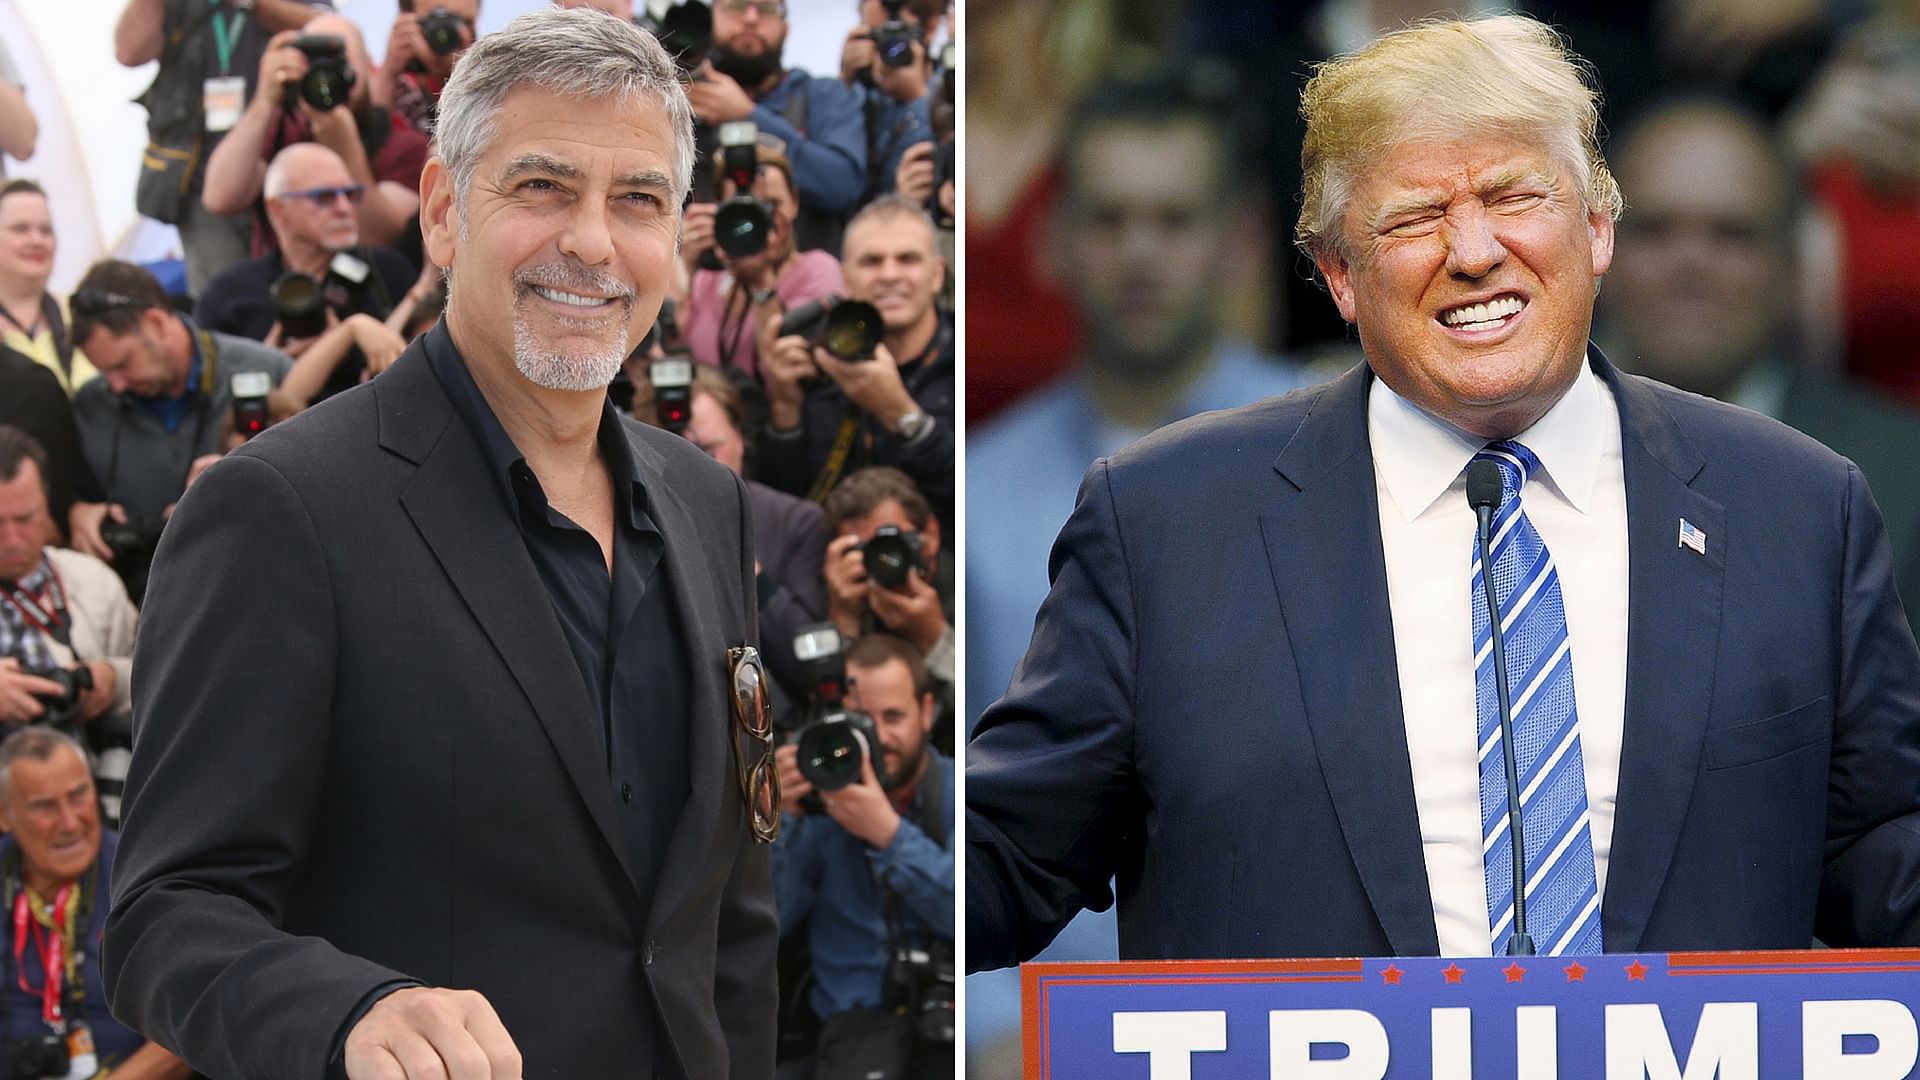 George Clooney (left) and Donald Trump (right). (Photo: AP)